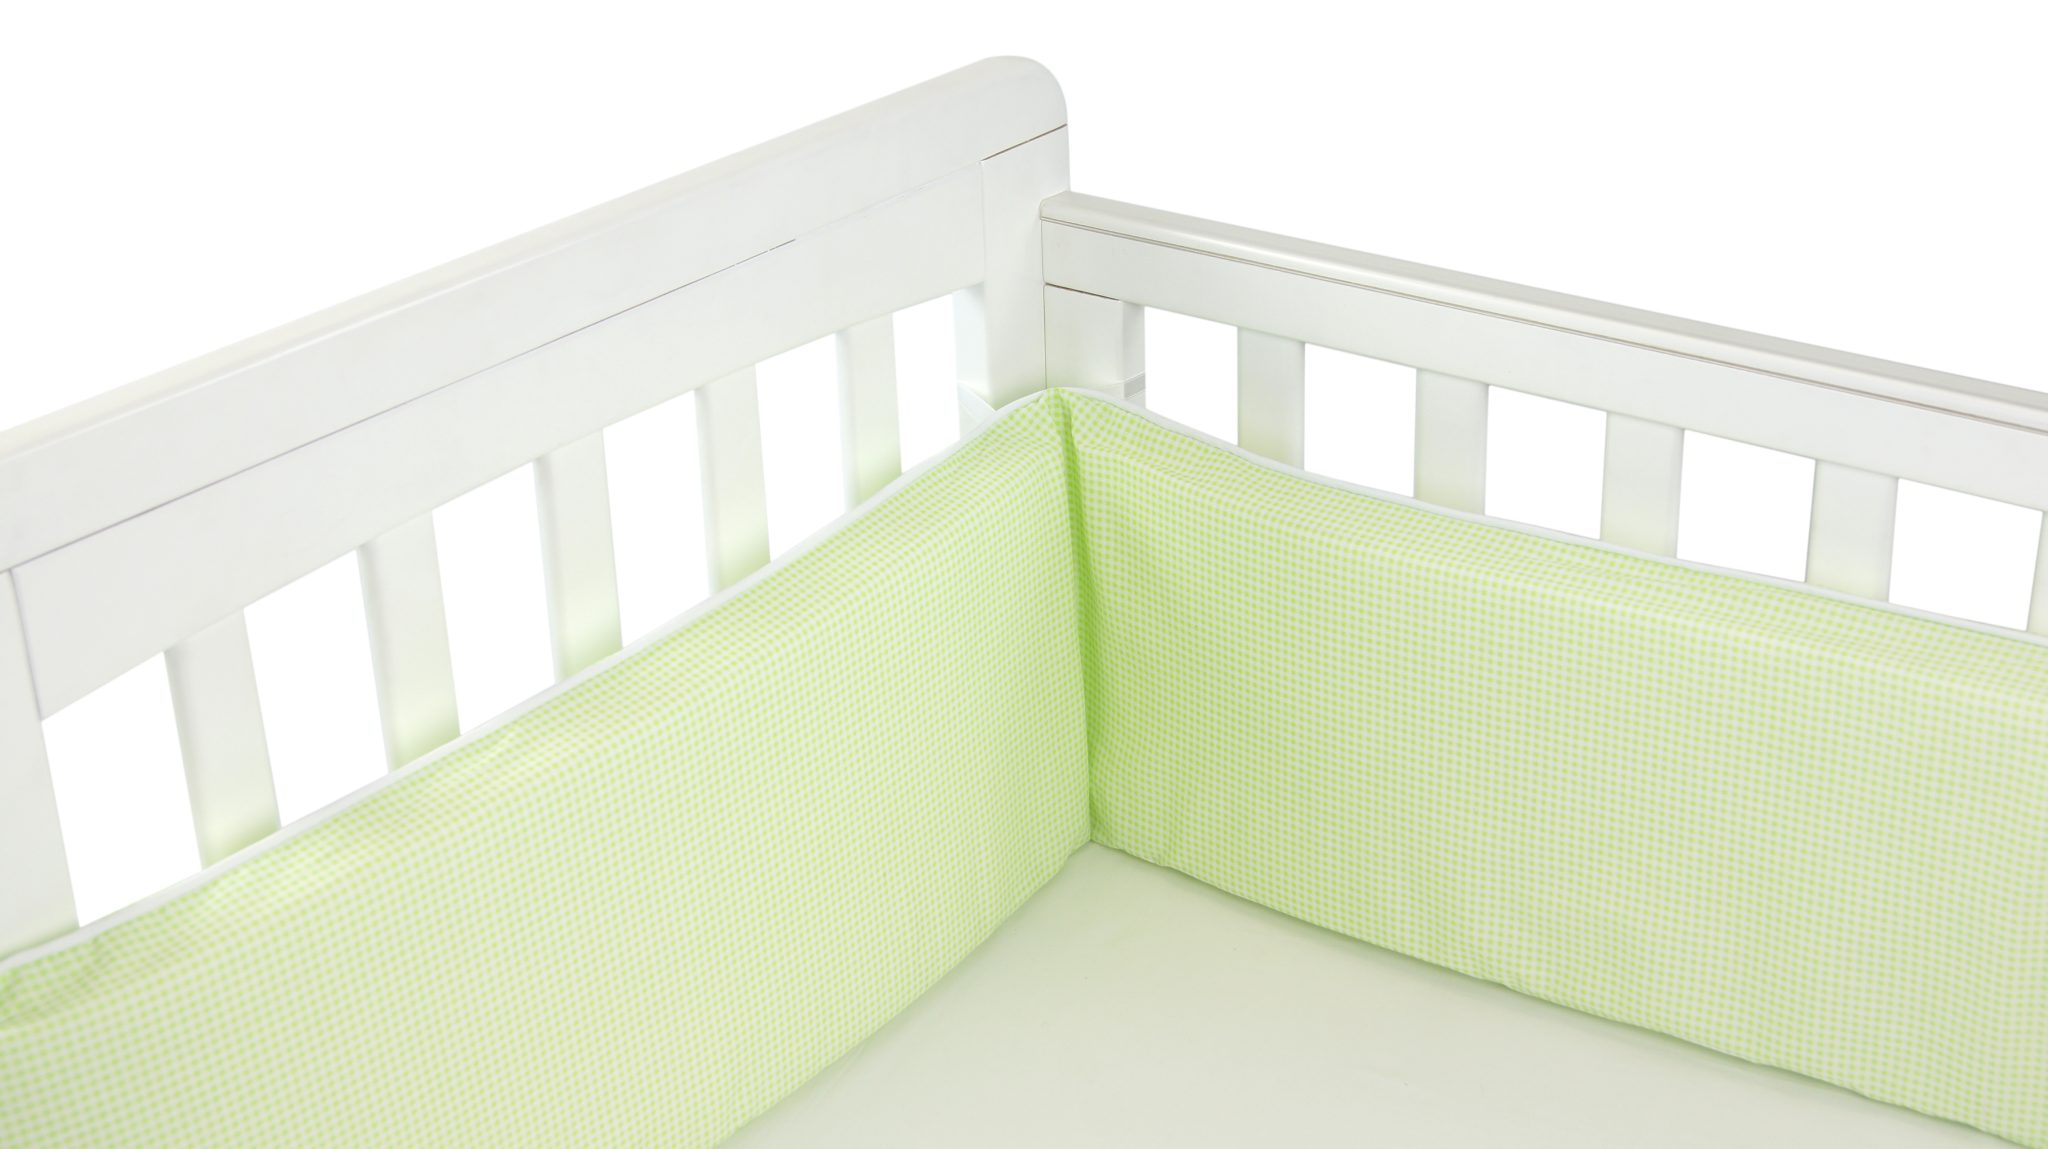 Airoya English - The Cot Bumper Reinvented by Airoya®